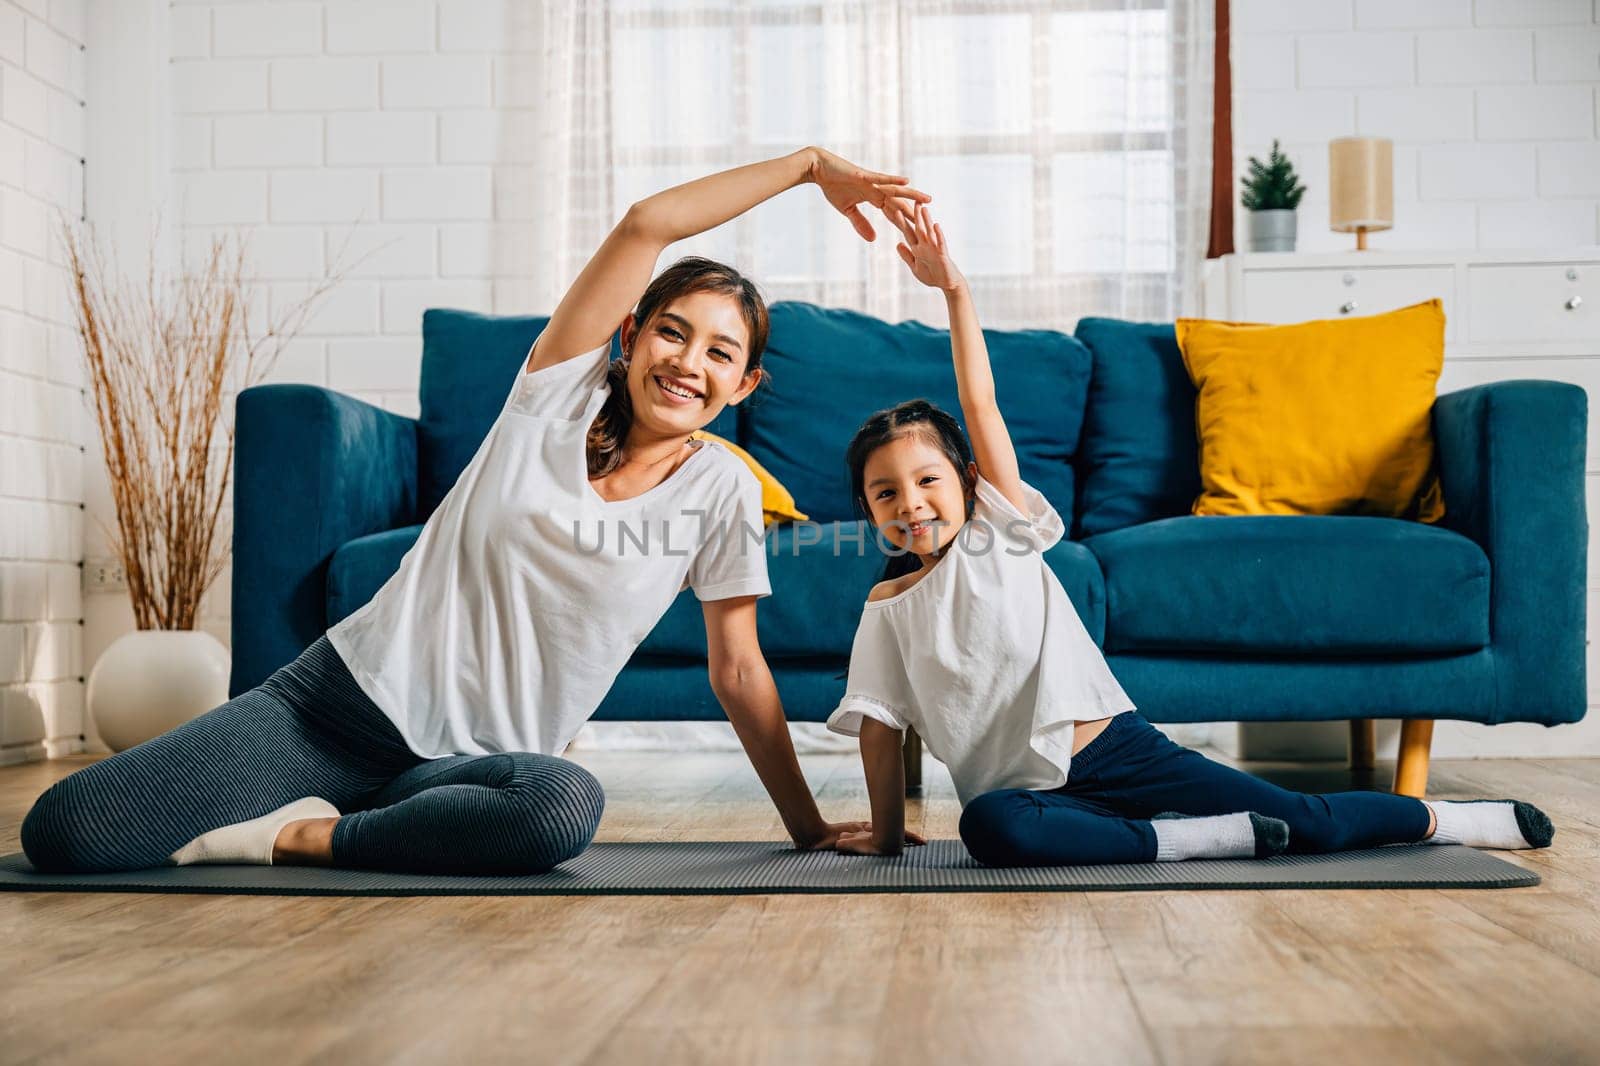 A mother and her little daughter practice yoga together focusing on relaxation and balance in the cozy living room by Sorapop